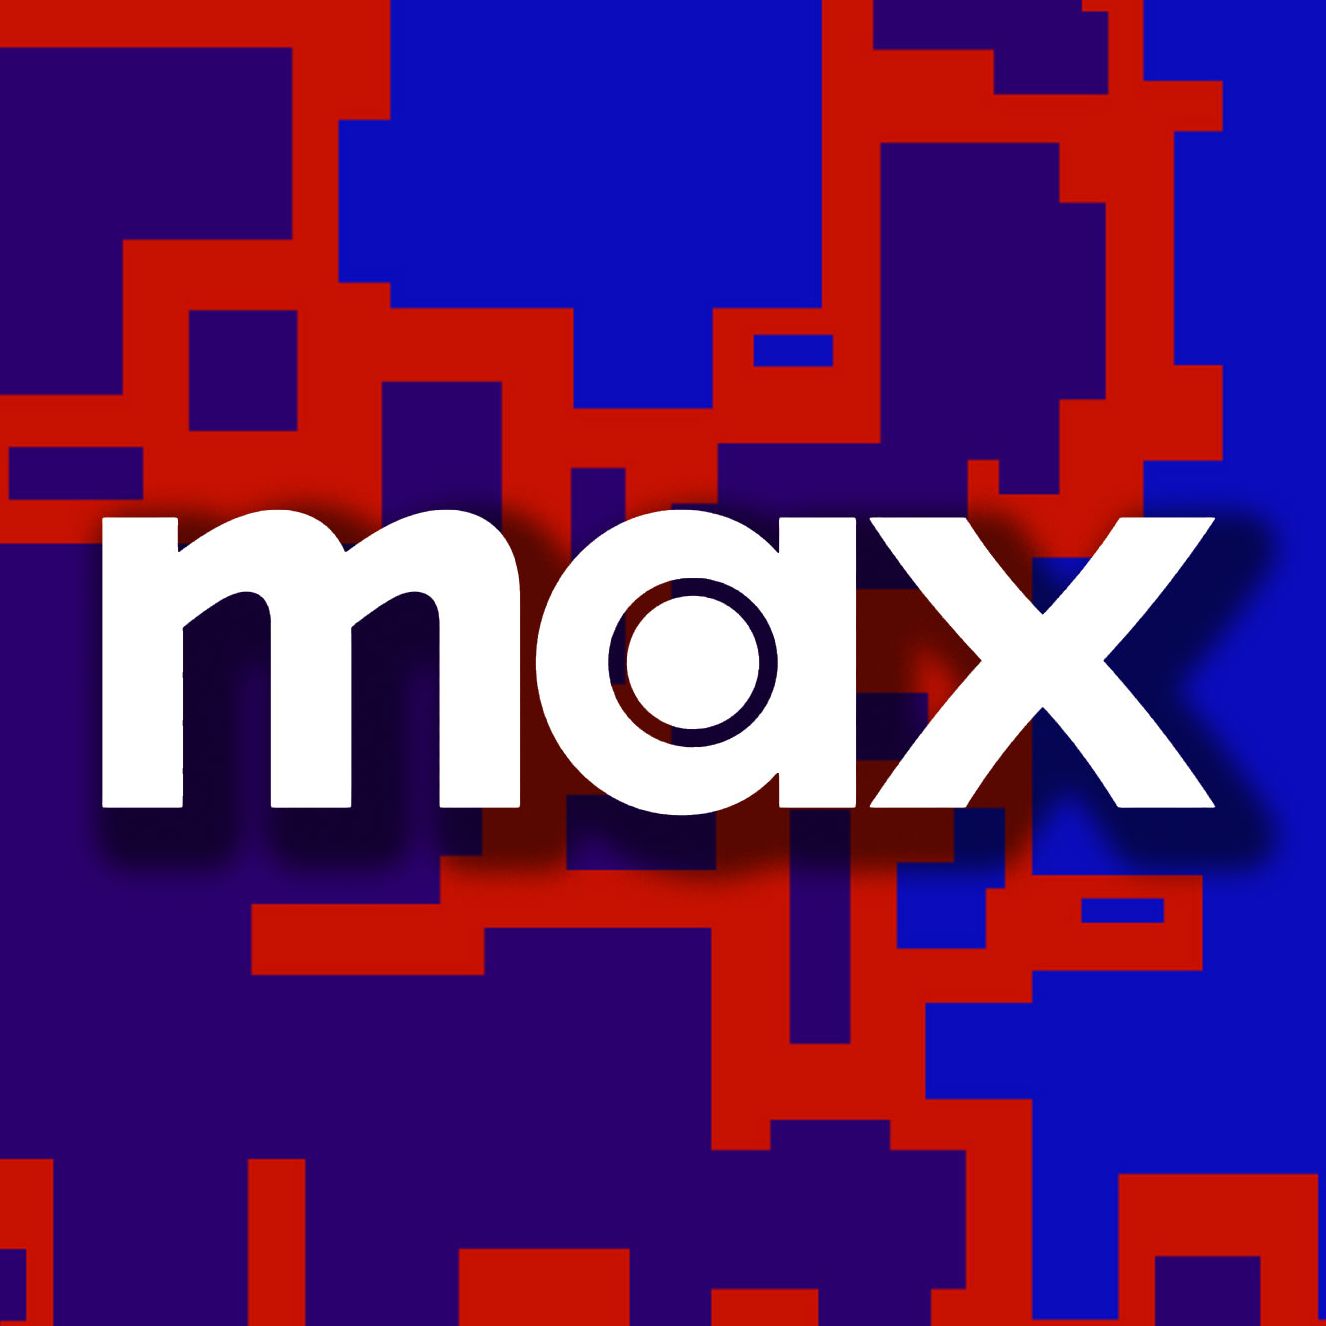 File:Logo of Max Fashion and Accessories, March 2018.png - Wikimedia Commons